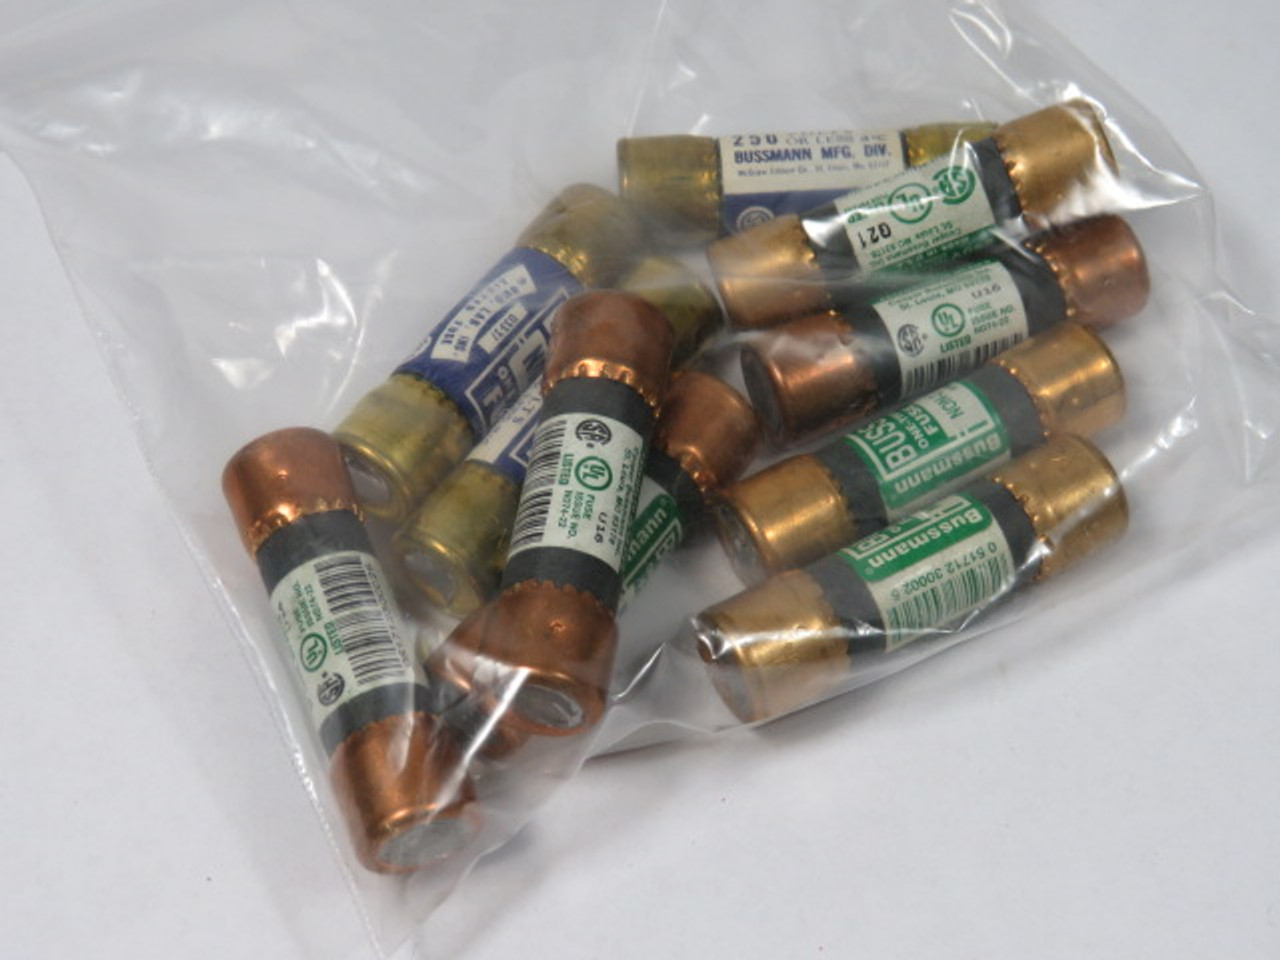 Bussmann NON-2 One Time Fuse 2A 250V Lot of 10 USED